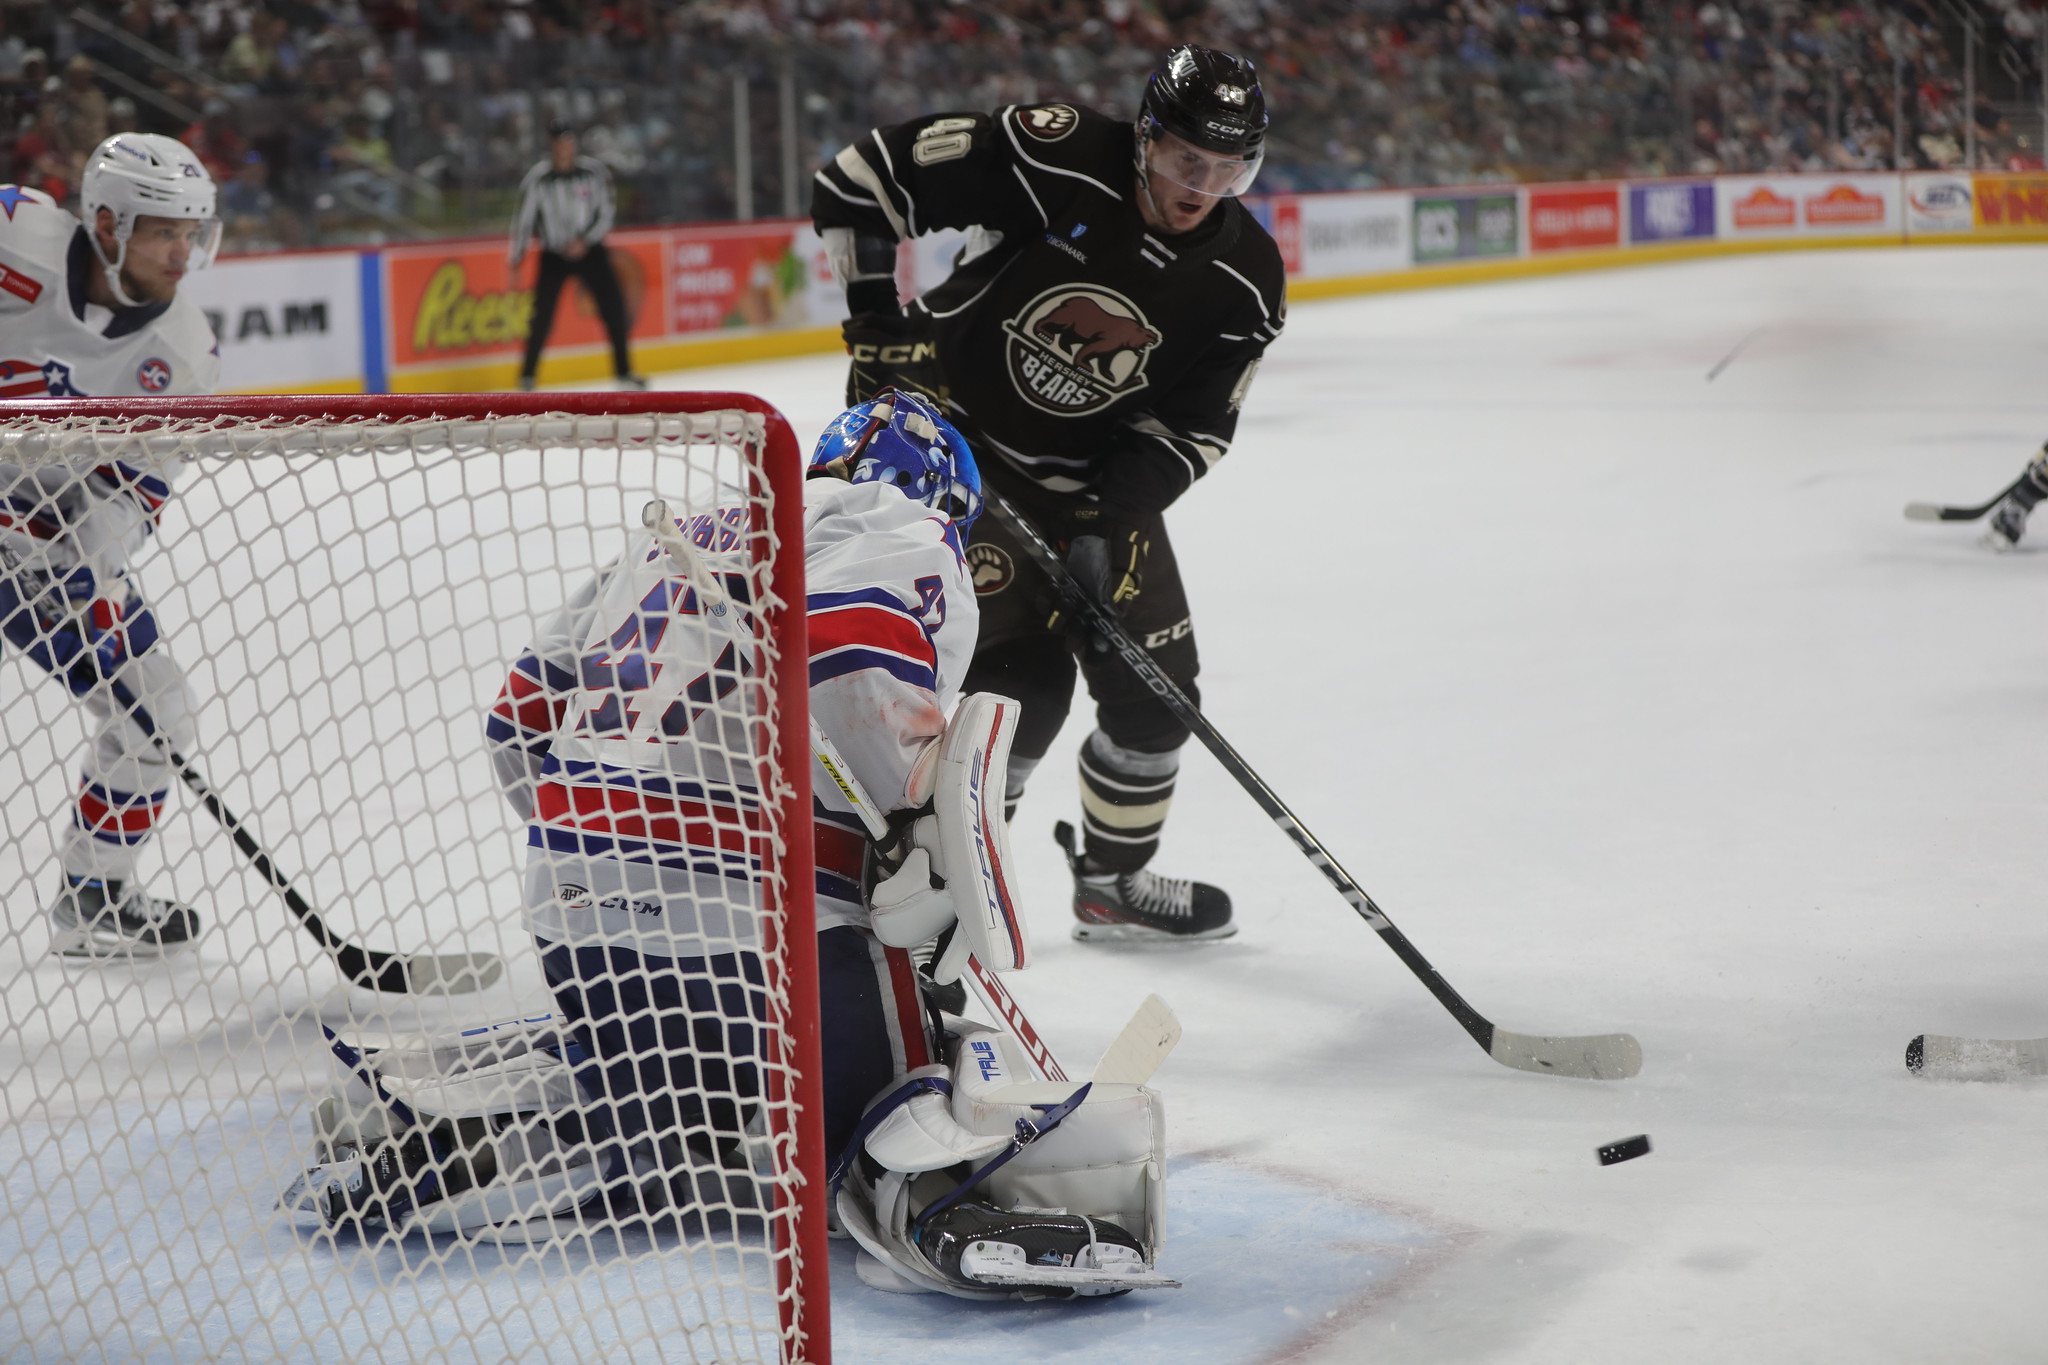 Rochester Americans goalie Malcolm Subban makes a stop against the Hershey Bears in Game 1 of the Eastern Conference Finals. (Tori Hartman/Hershey Bears)